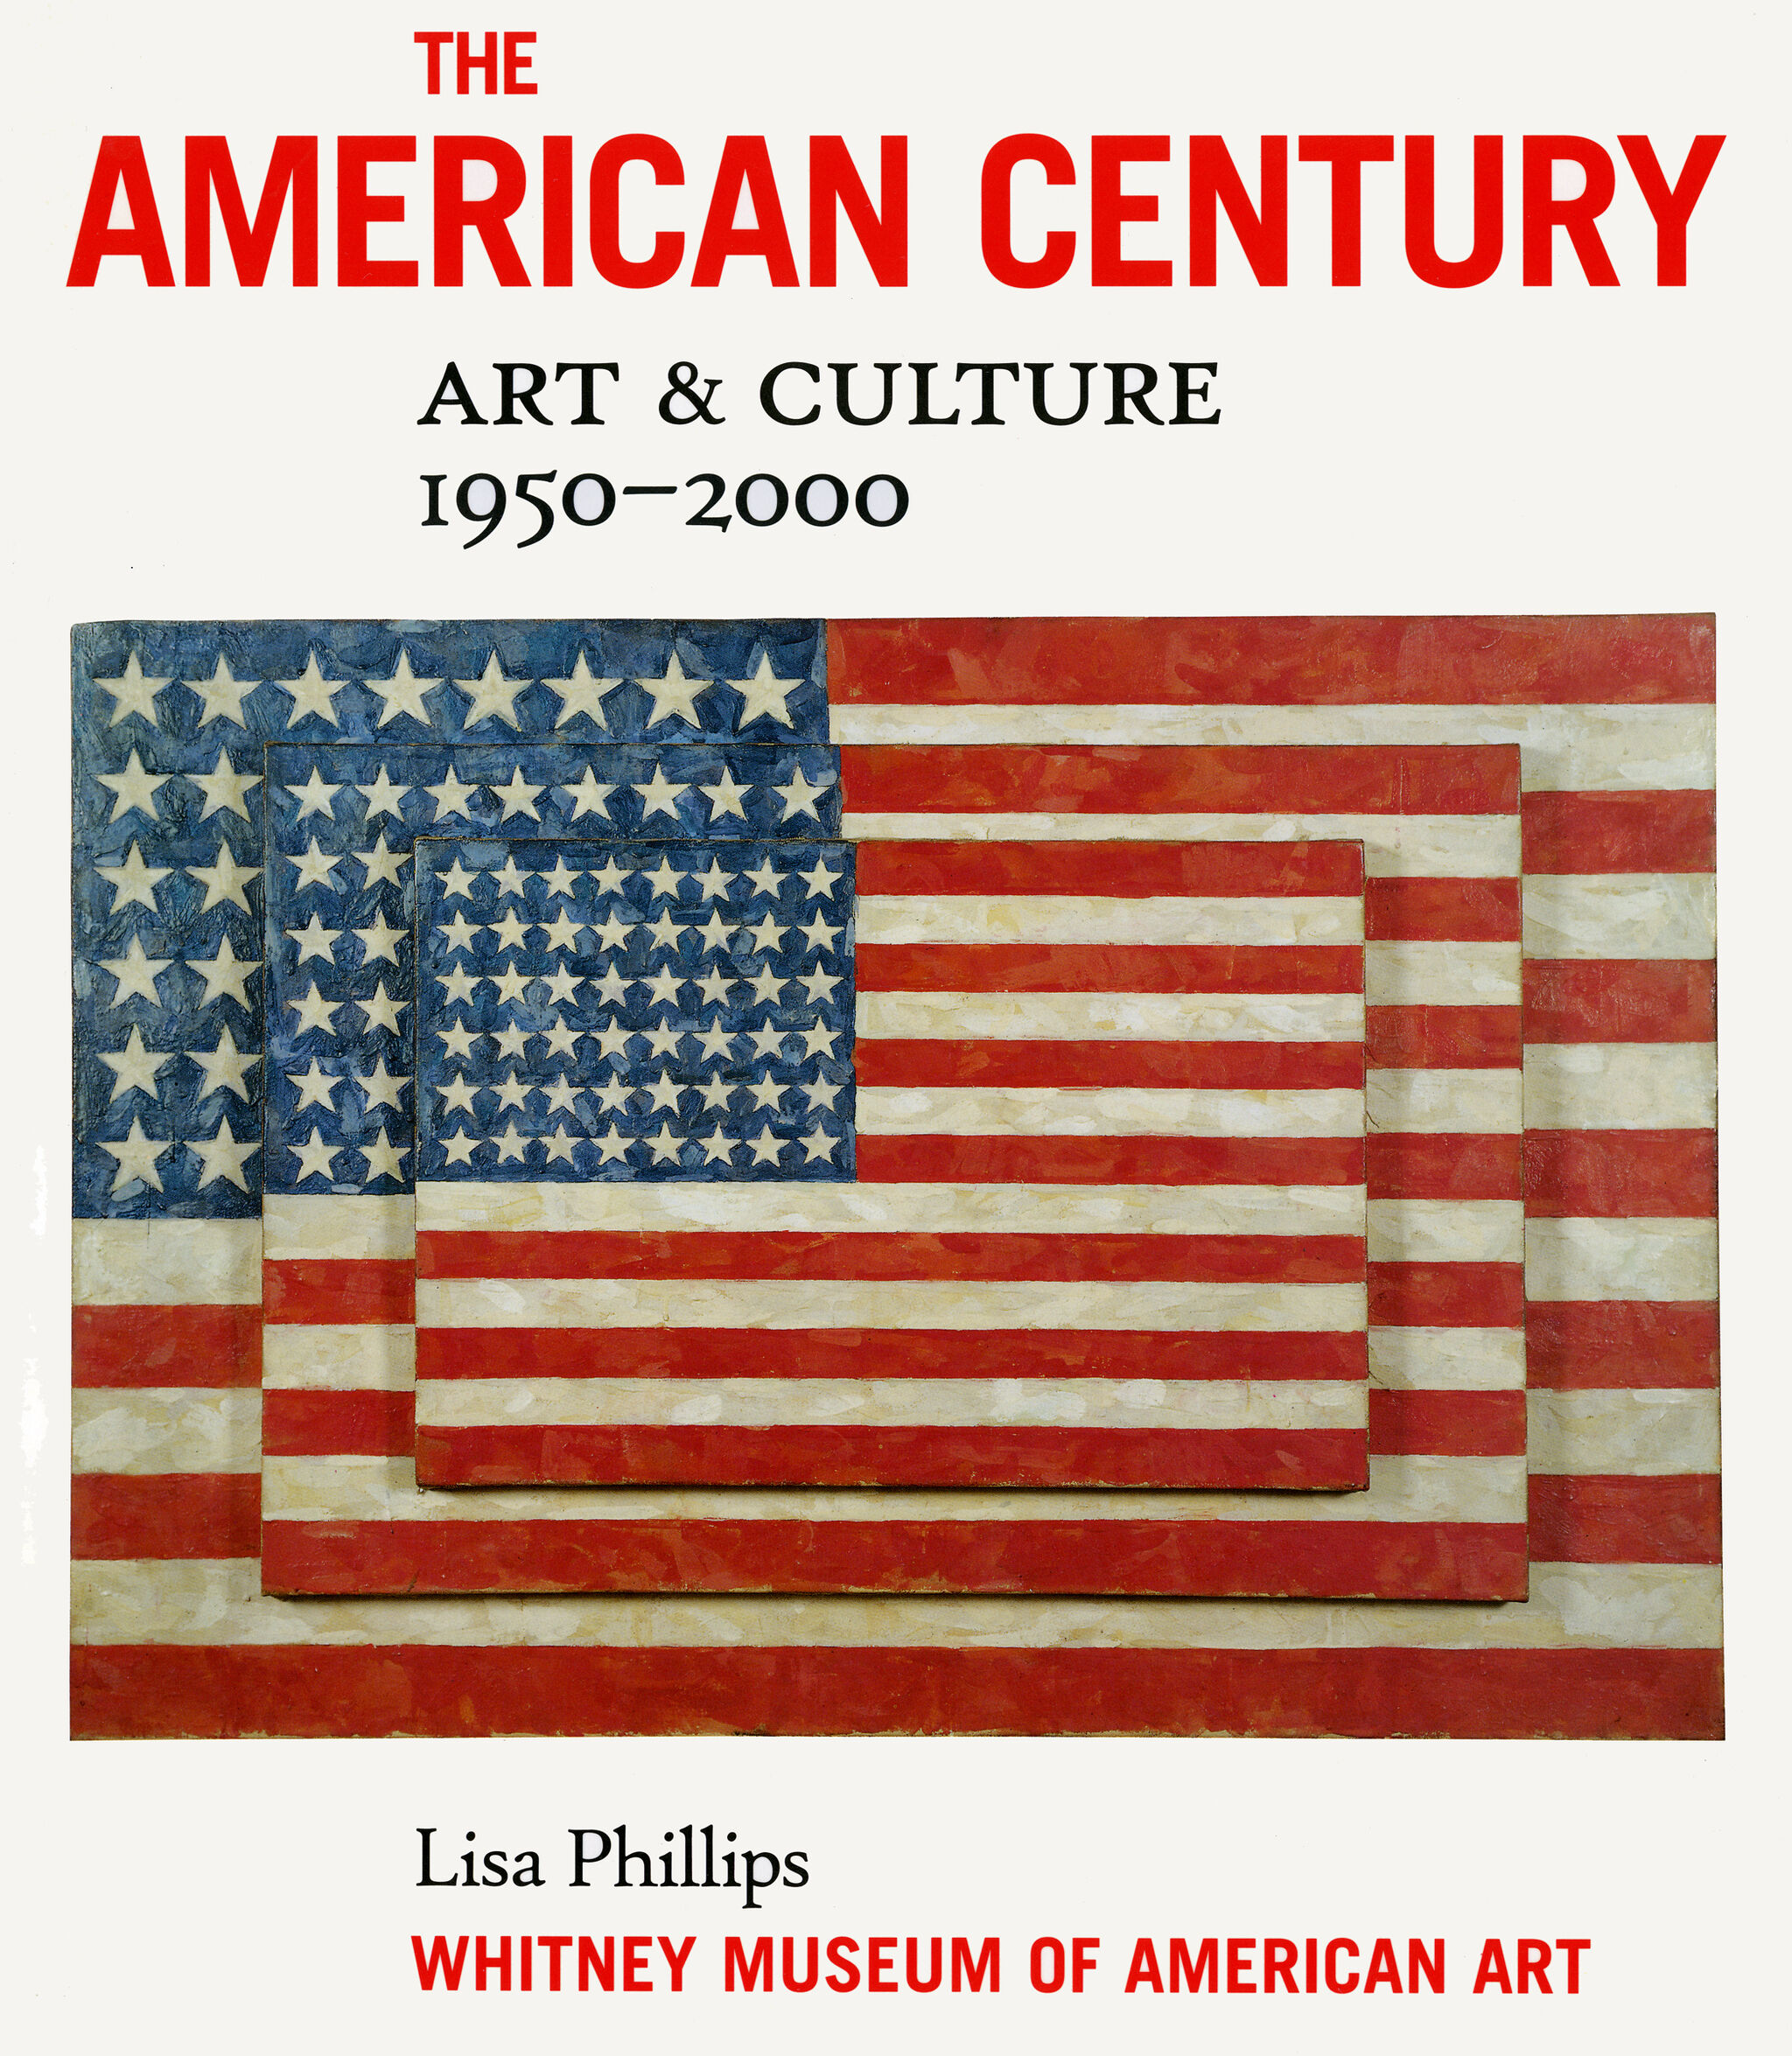 Book cover with an image of stacked American flags and bold, red type.